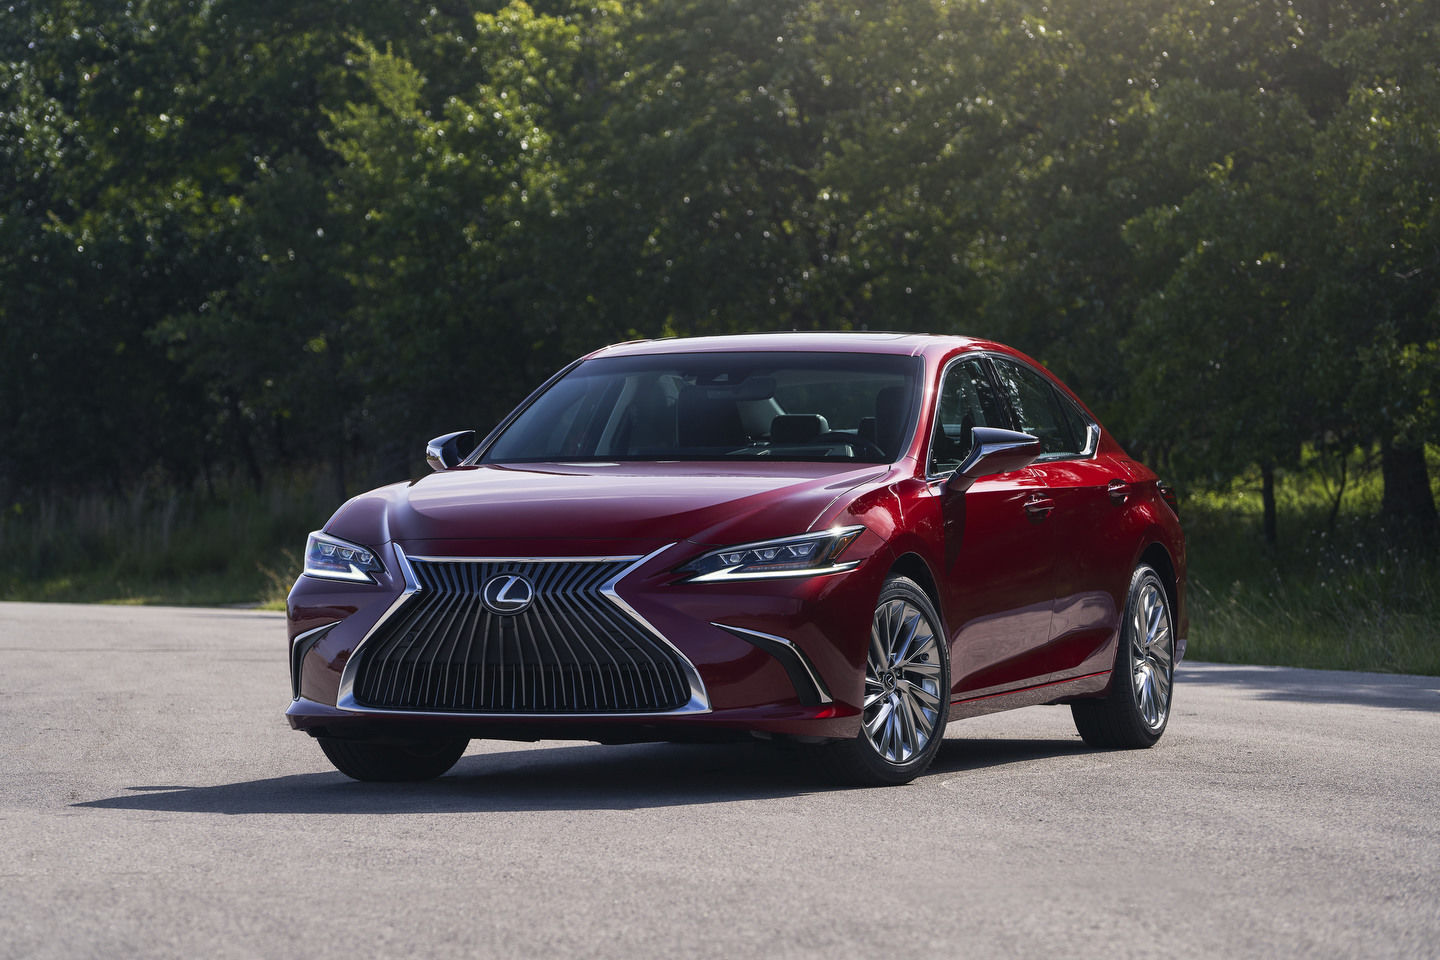 The 2023 Lexus ES is the Luxury Vehicle of Choice for the Discerning Driver